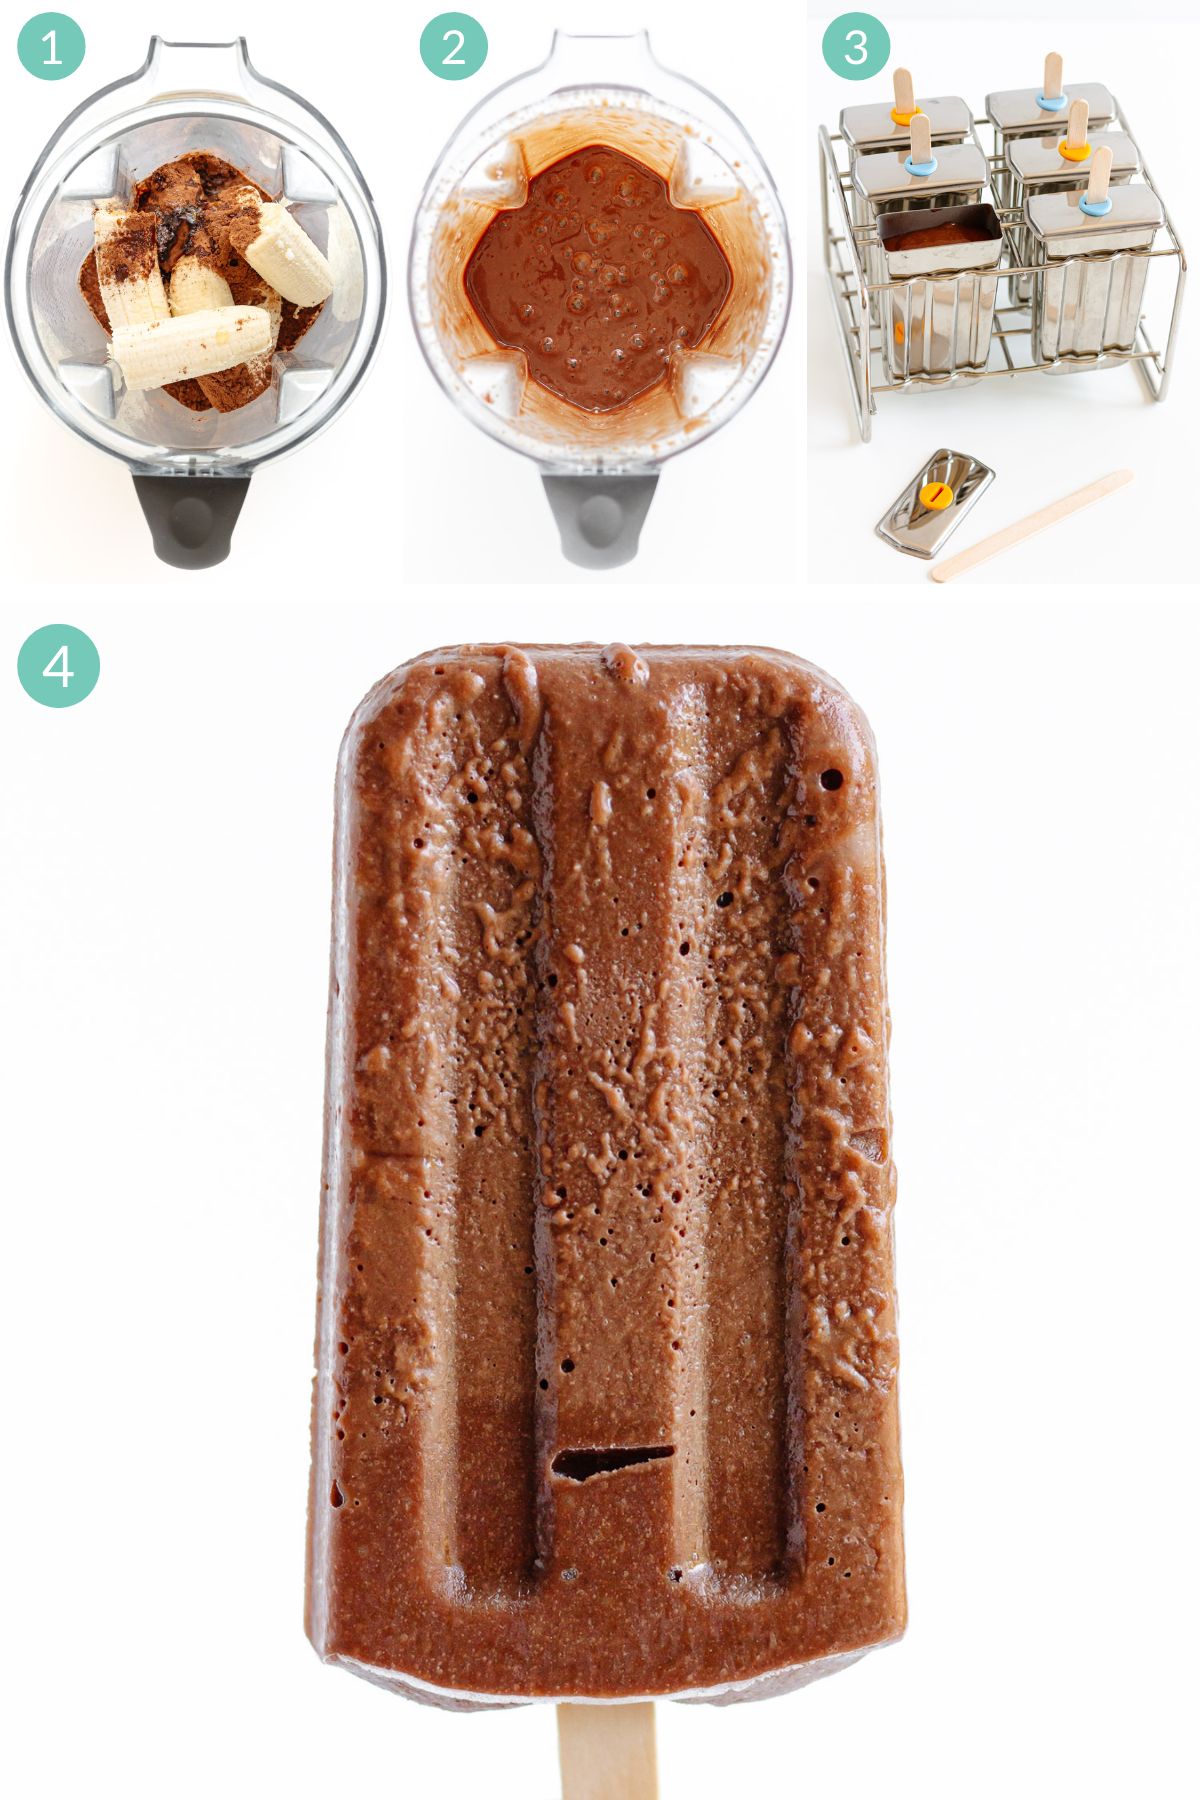 Numbered photo collage showing how to make chocolate banana popsicles.